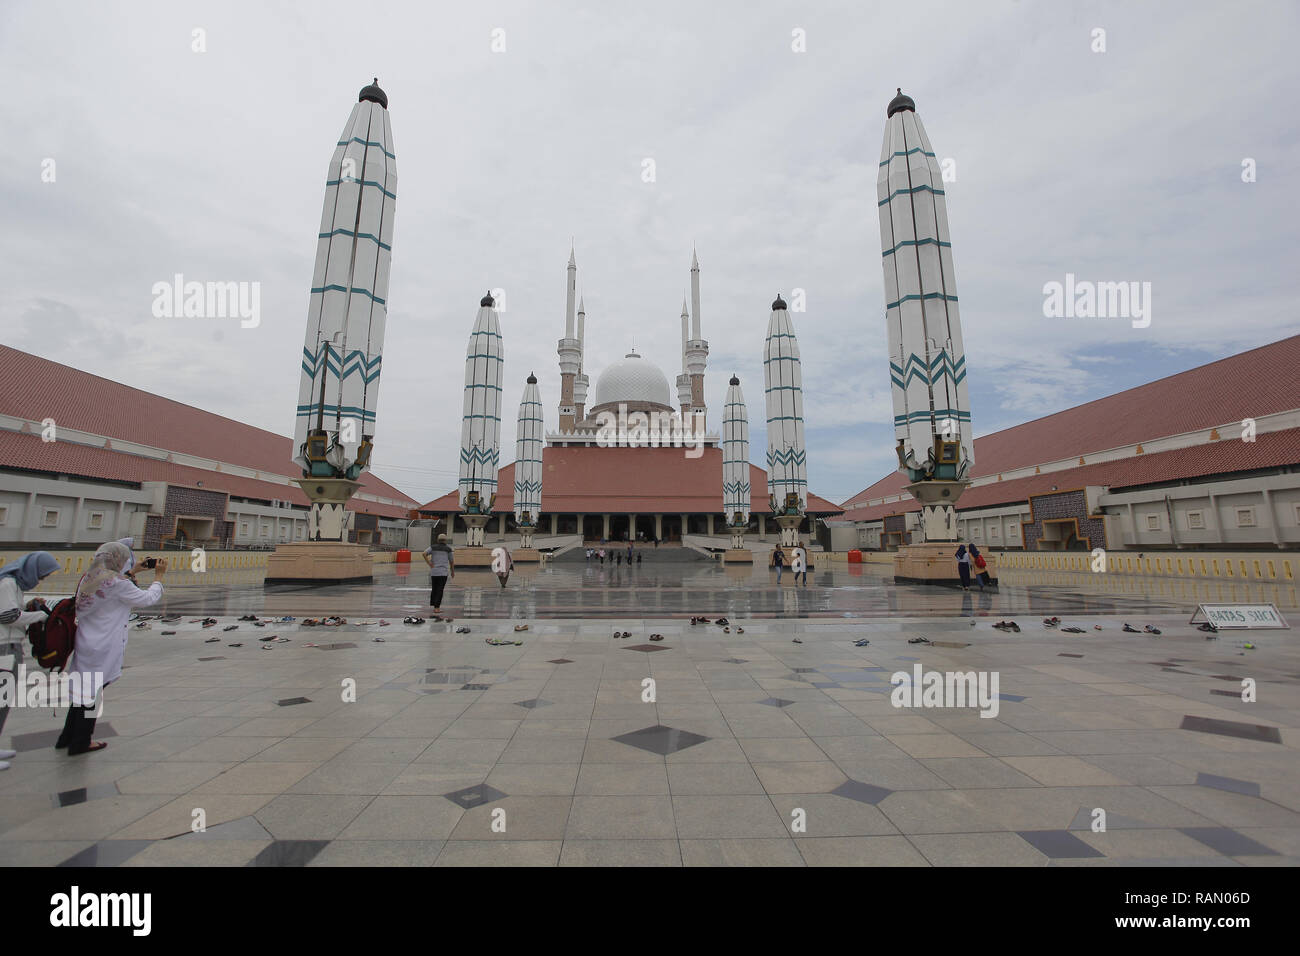 Semarang, Central Java, Indonesia. 2nd Jan, 2019. Residents are seen taking pictures with a smartphone at the Central Java Grand Mosque (MAJT) complex in Semarang, Central Java from aerial.The mosque with a capacity of 15,000 worshipers is not only a center of worship and Islamic da'wah, it is also a favourite tourist destination in Semarang because it has a unique architecture with a blend of Javanese, Arabic and Roman styles. Credit: Adriana Adinandra/SOPA Images/ZUMA Wire/Alamy Live News Stock Photo